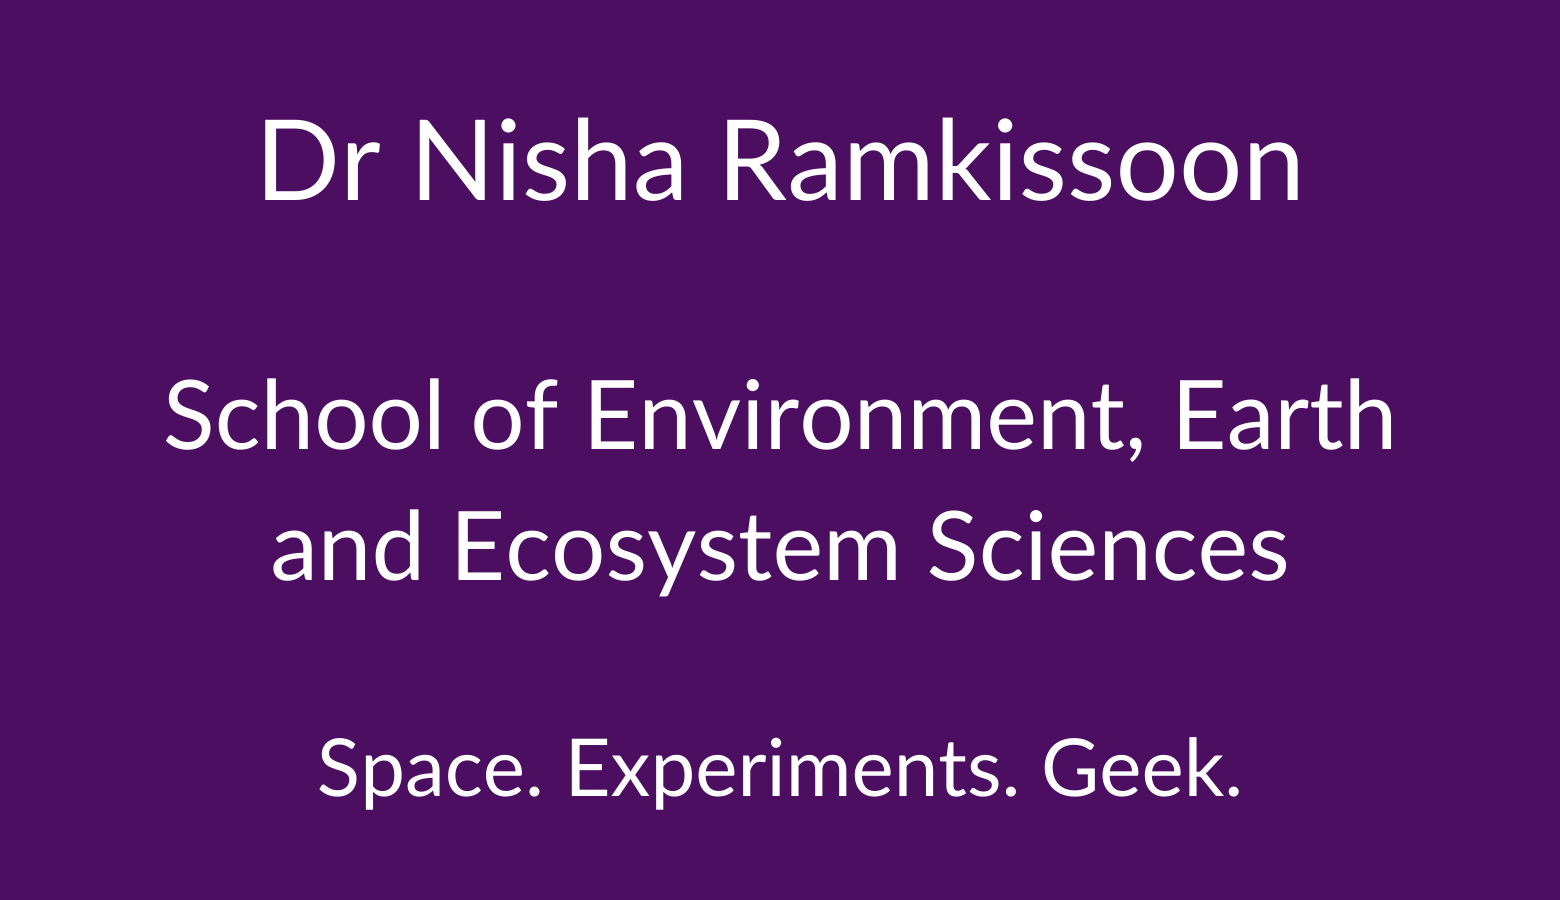 Dr Nisha Ramkissoon. School of Environment, Earth and Ecosystem Sciences. Space. Experiments. Geek.